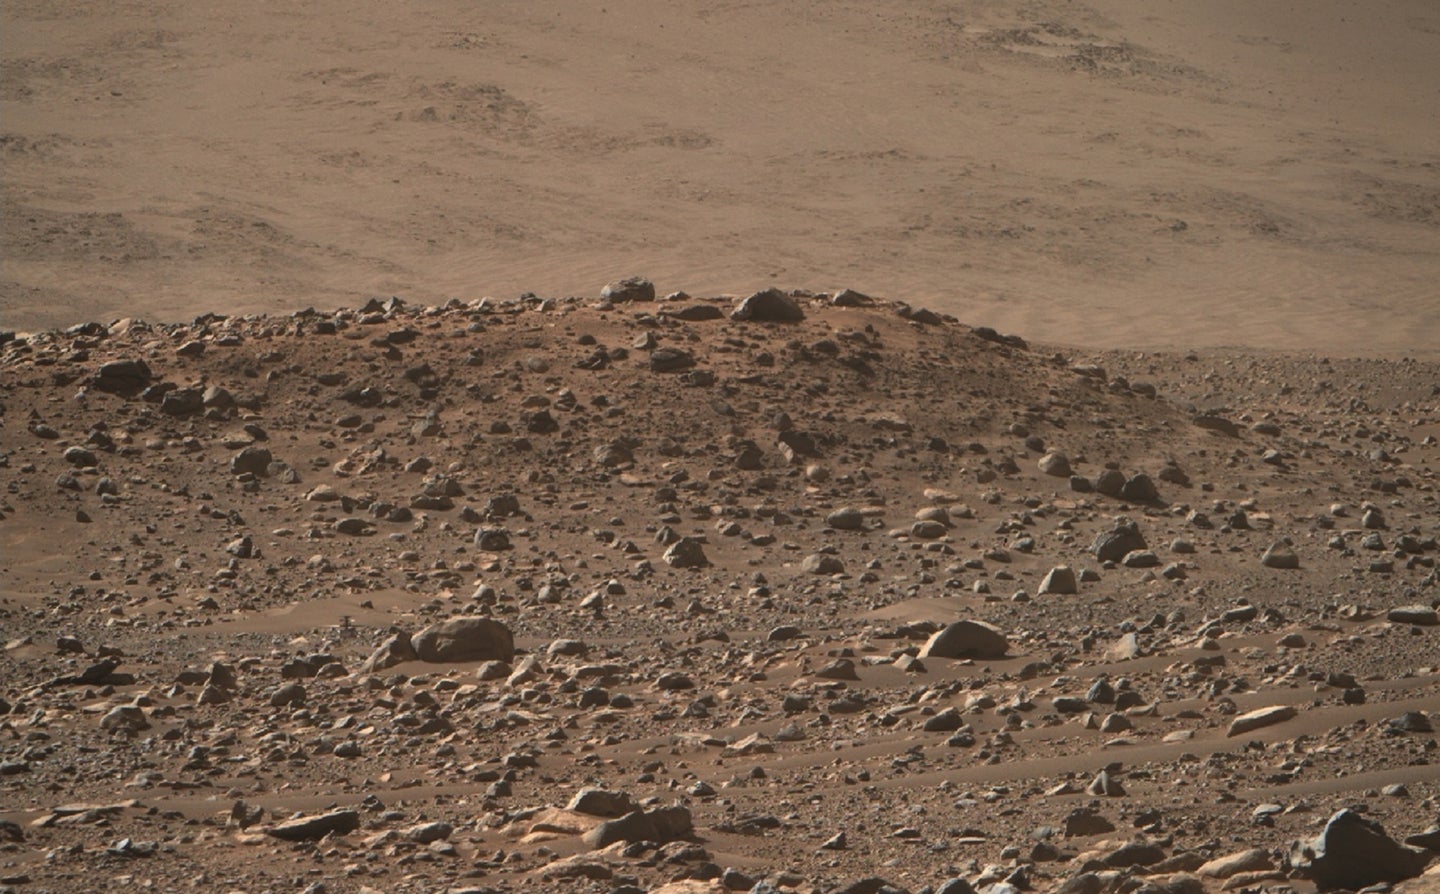 NASA Ingenuity helicopter lost in a Mars crater in a photo taken by Perseverance rover